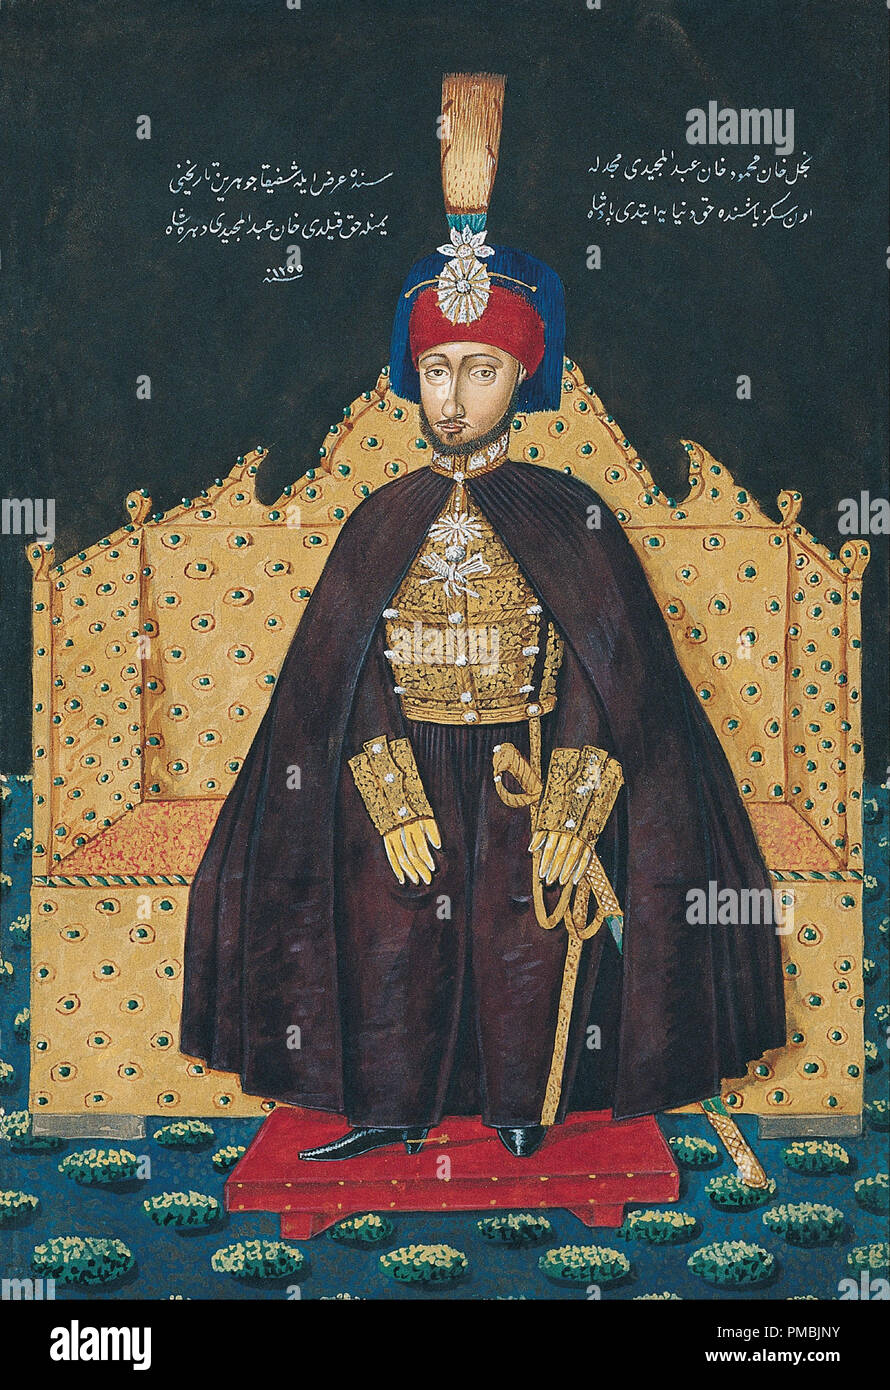 Sultan Abdülmecid. Date/Period: Mid-19th Century. Gouche on paper. Height: 295 mm (11.61 in); Width: 195 mm (7.67 in). Author: UNKNOWN. ANONYMOUS. Stock Photo